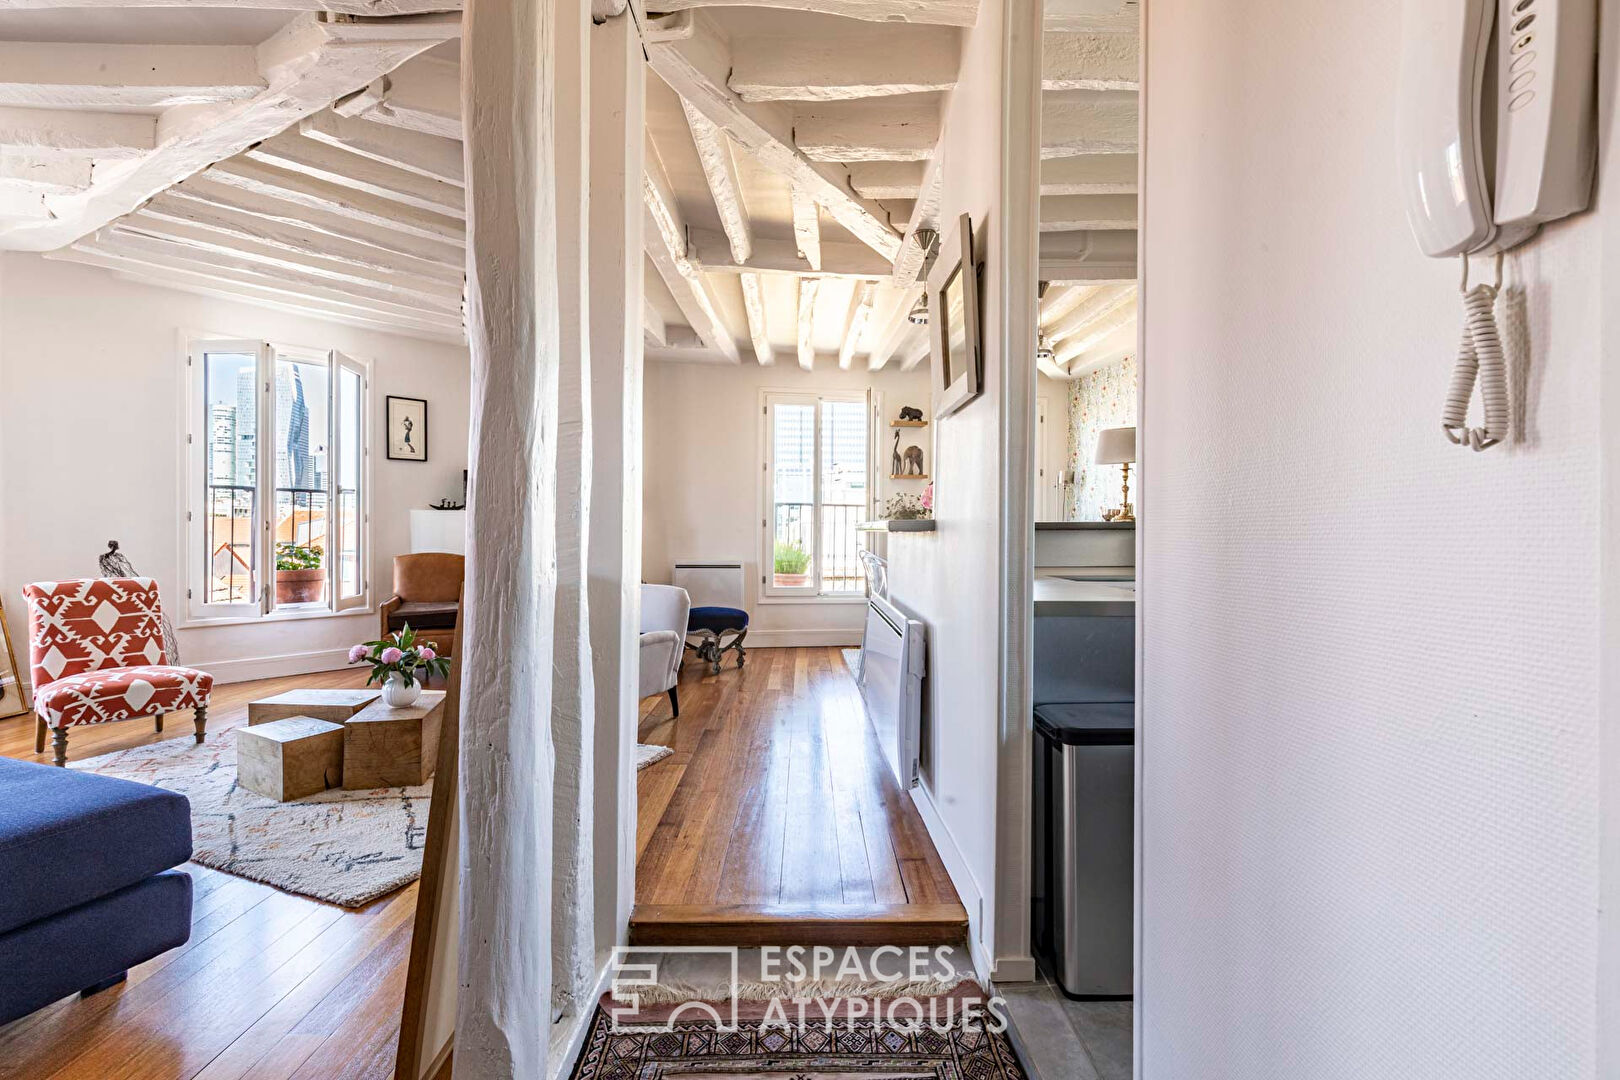 Charming duplex on the top floor with a long balcony and open view